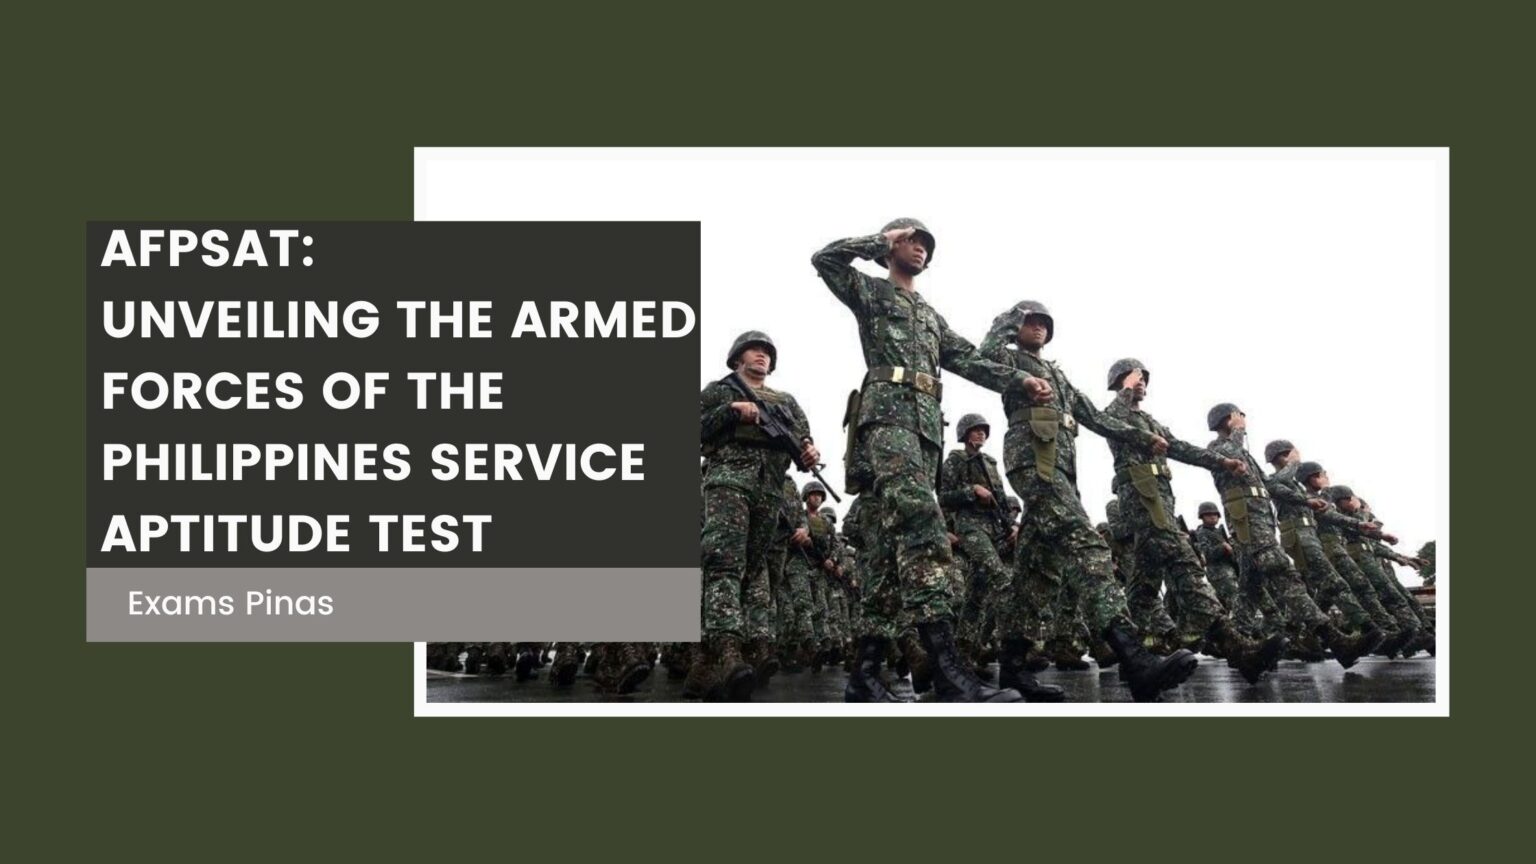 afpsat-unveiling-the-armed-forces-of-the-philippines-service-aptitude-test-exams-pinas